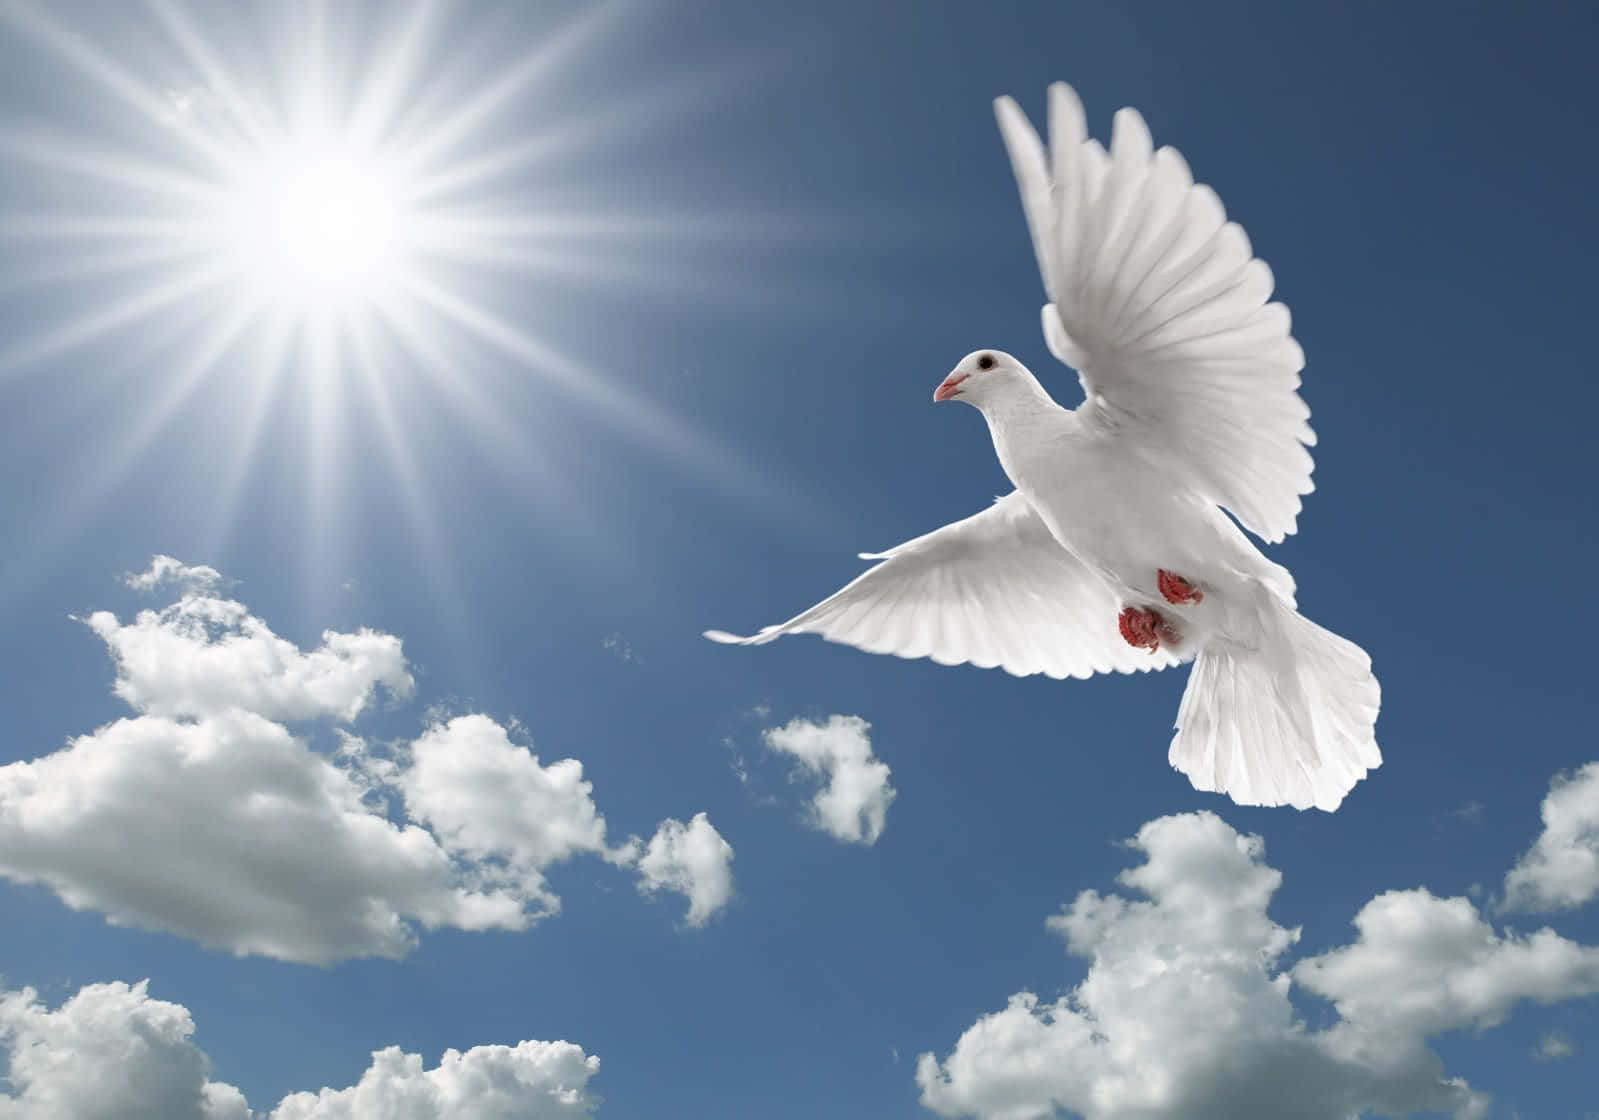 Download Flying Bird Peaceful White Dove Wallpaper 